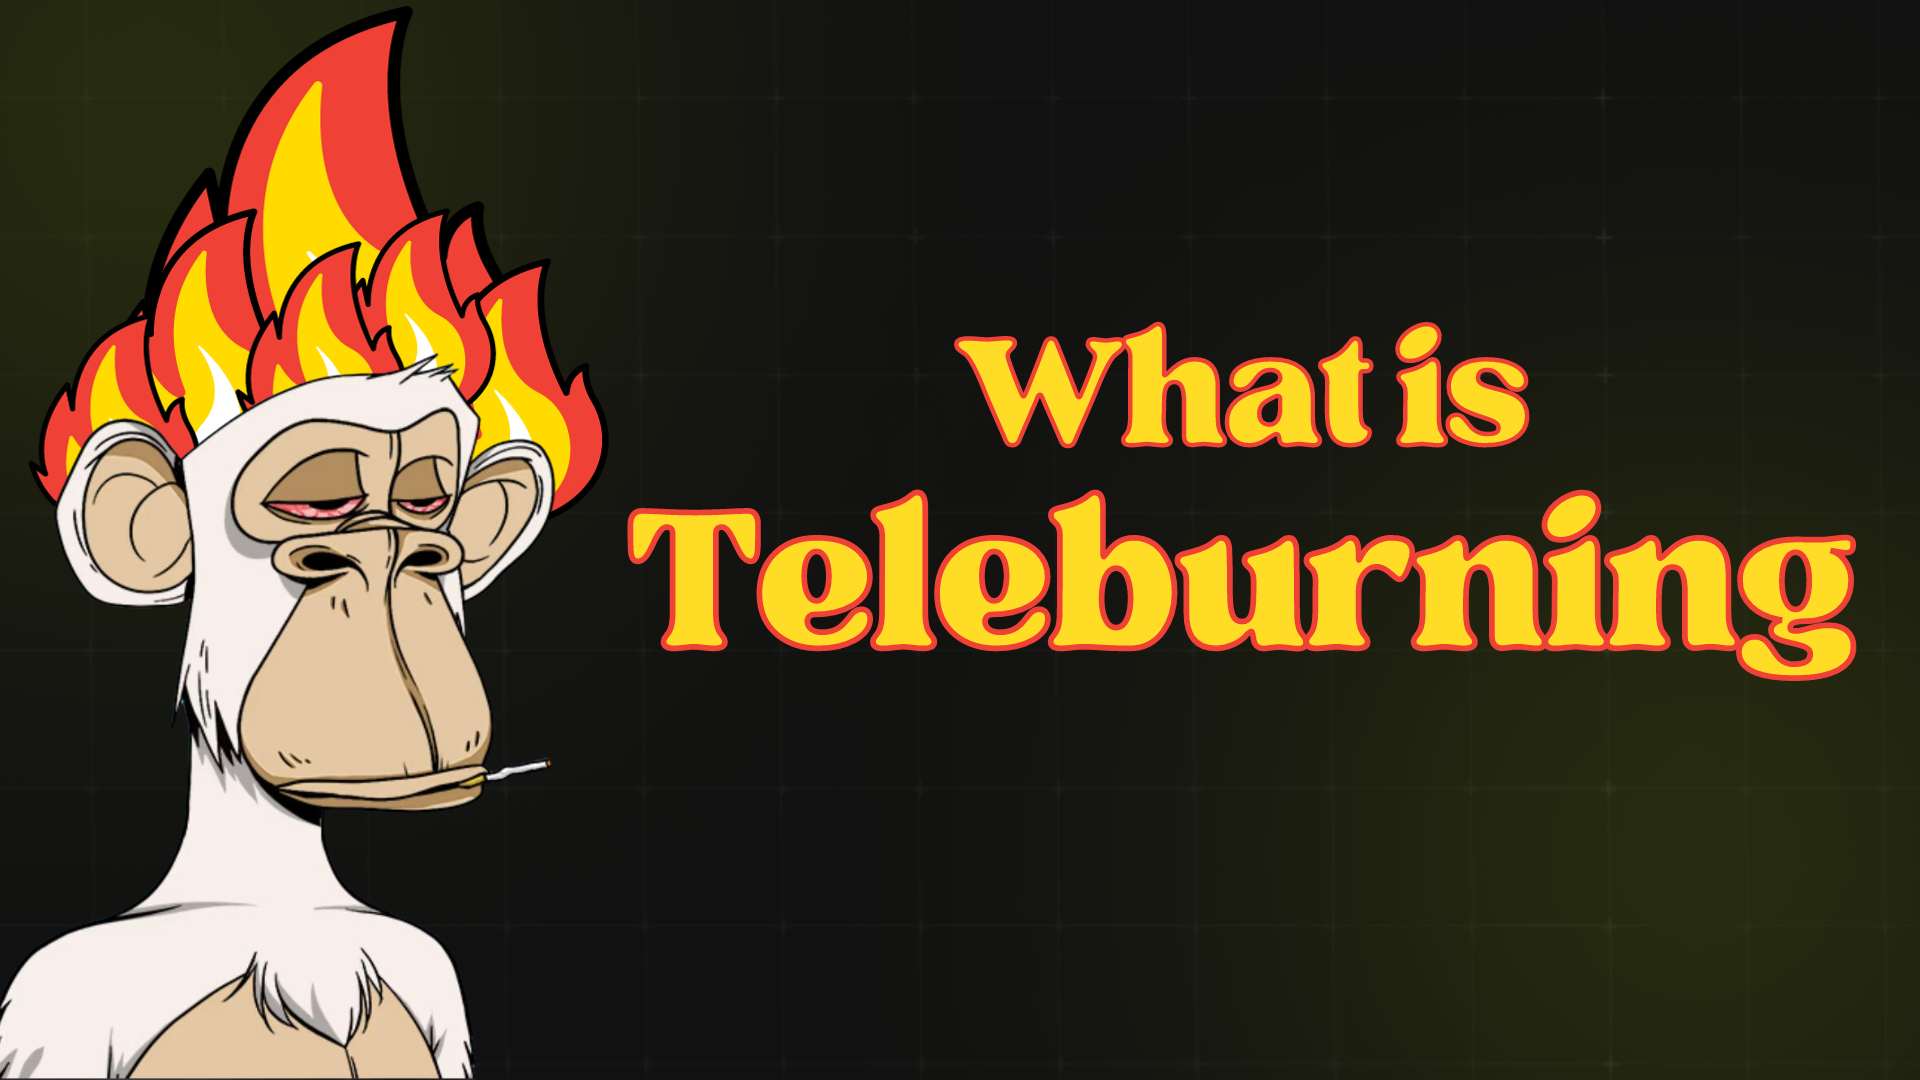 What is Teleburning?